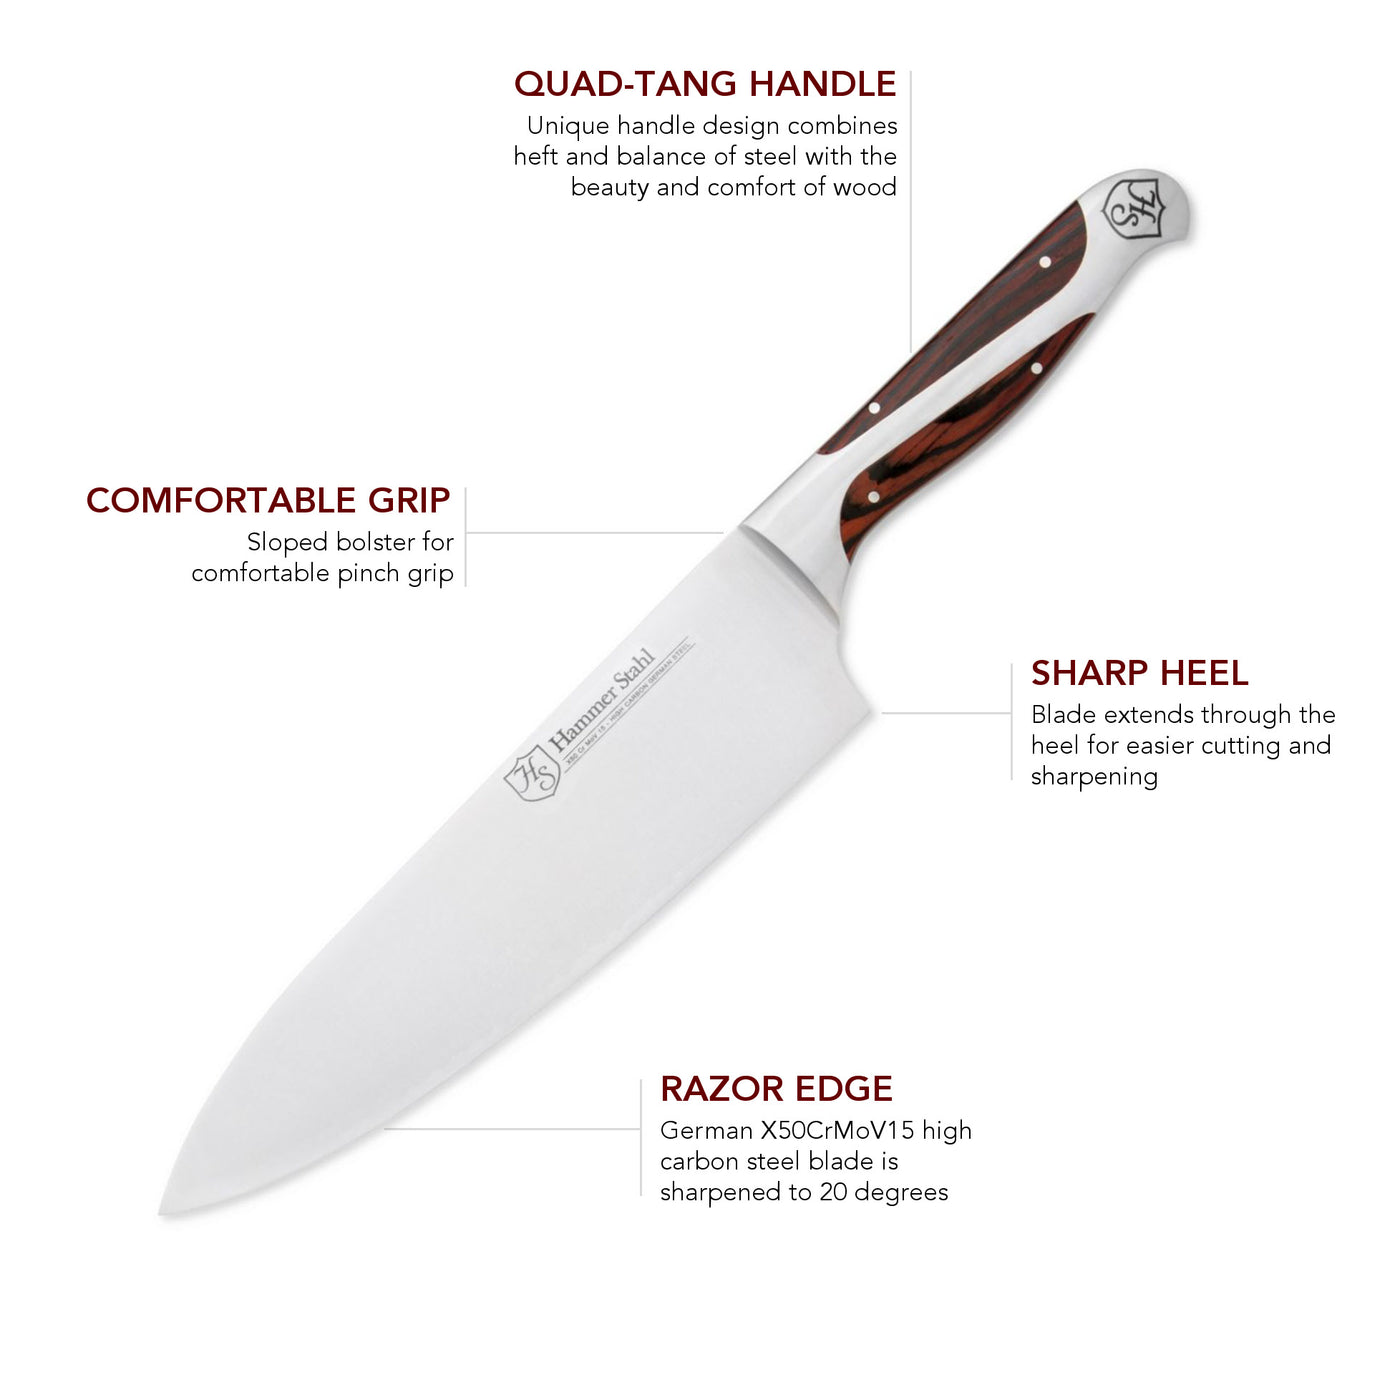 Cutluxe Chef Knife – 8 Razor Sharp Kitchen Knife Forged from High Carbon  German Steel – Chef's Knive with Ergonomic Handle & Full Tang Design –